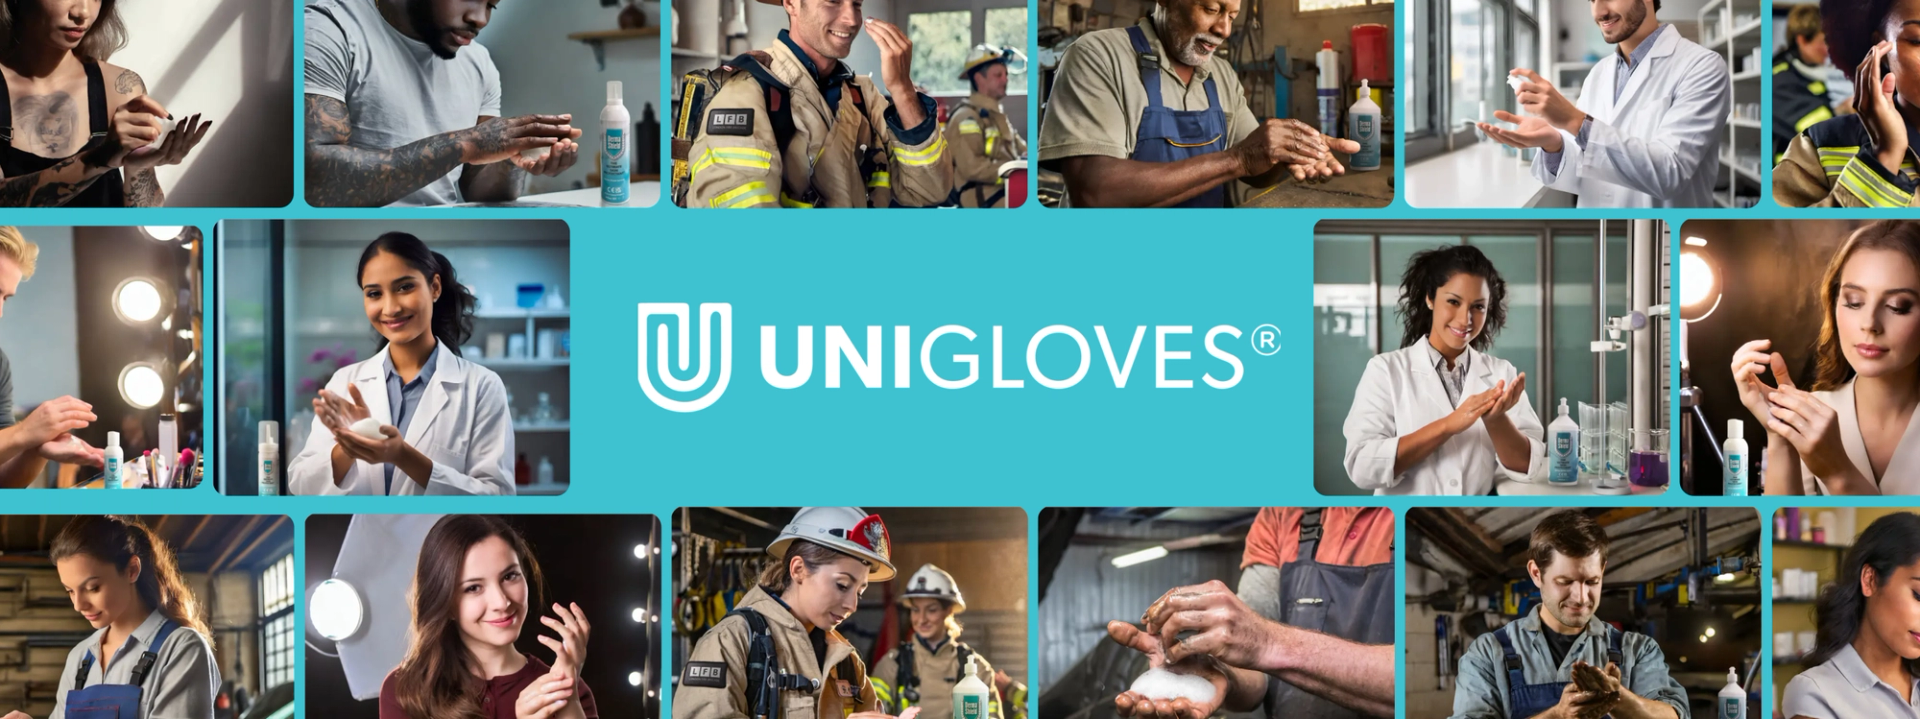 Unigloves Accelerates Time-To-Market With AI-Driven Imagery